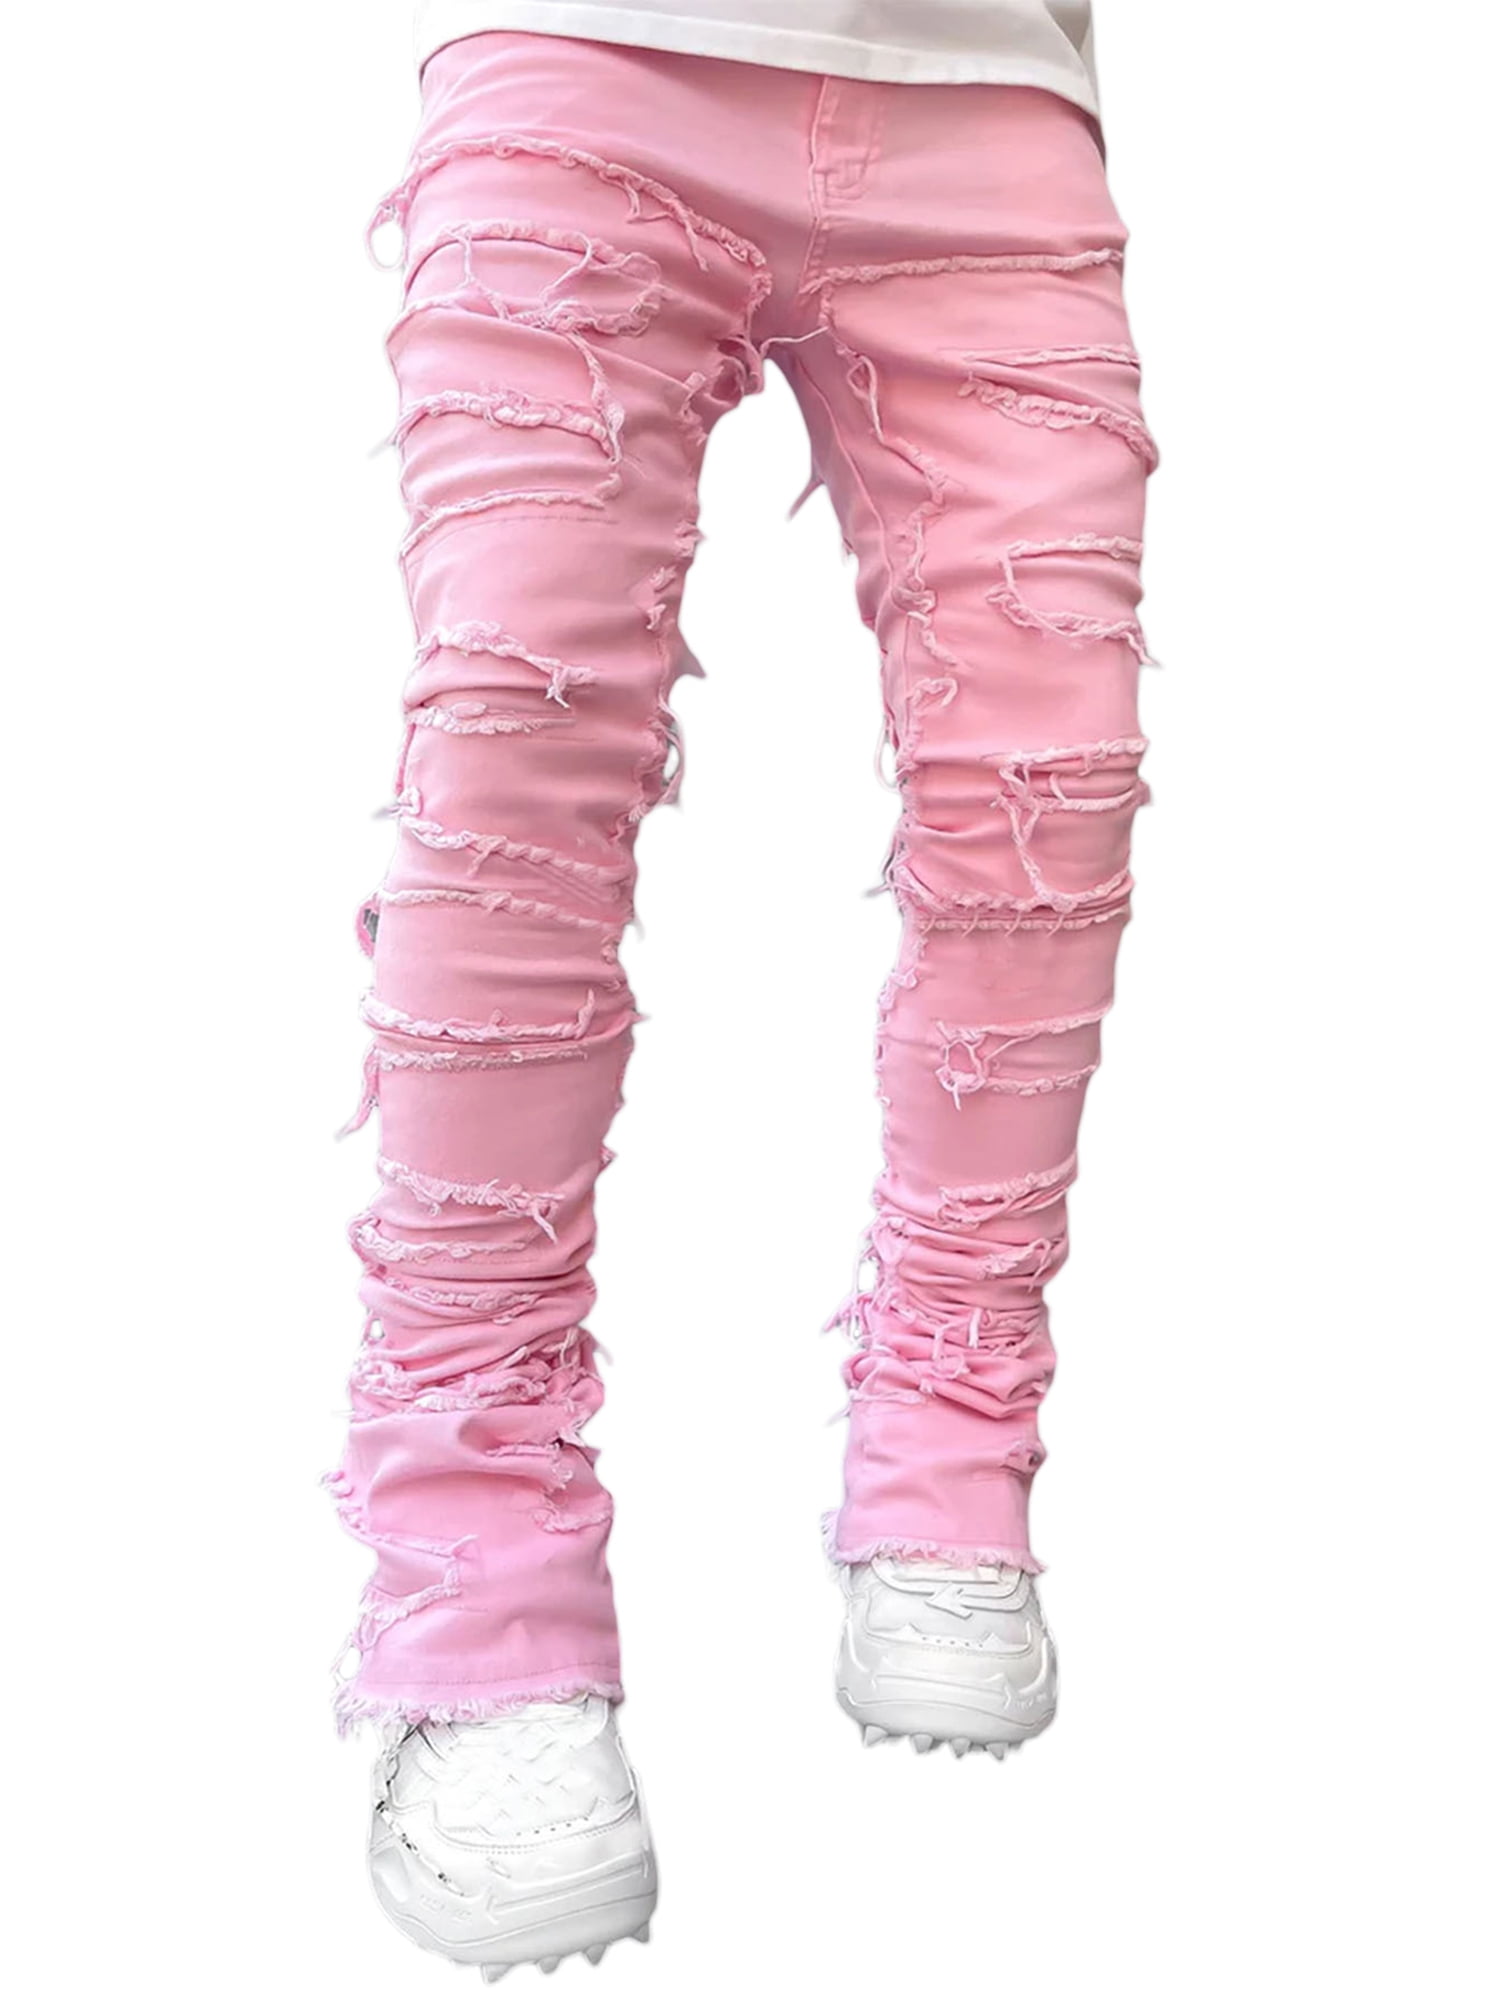 Men's Ripped Stacked Jeans Slim Fit Patch Distressed Destroyed Straight Leg  Denim Pants Streetwear